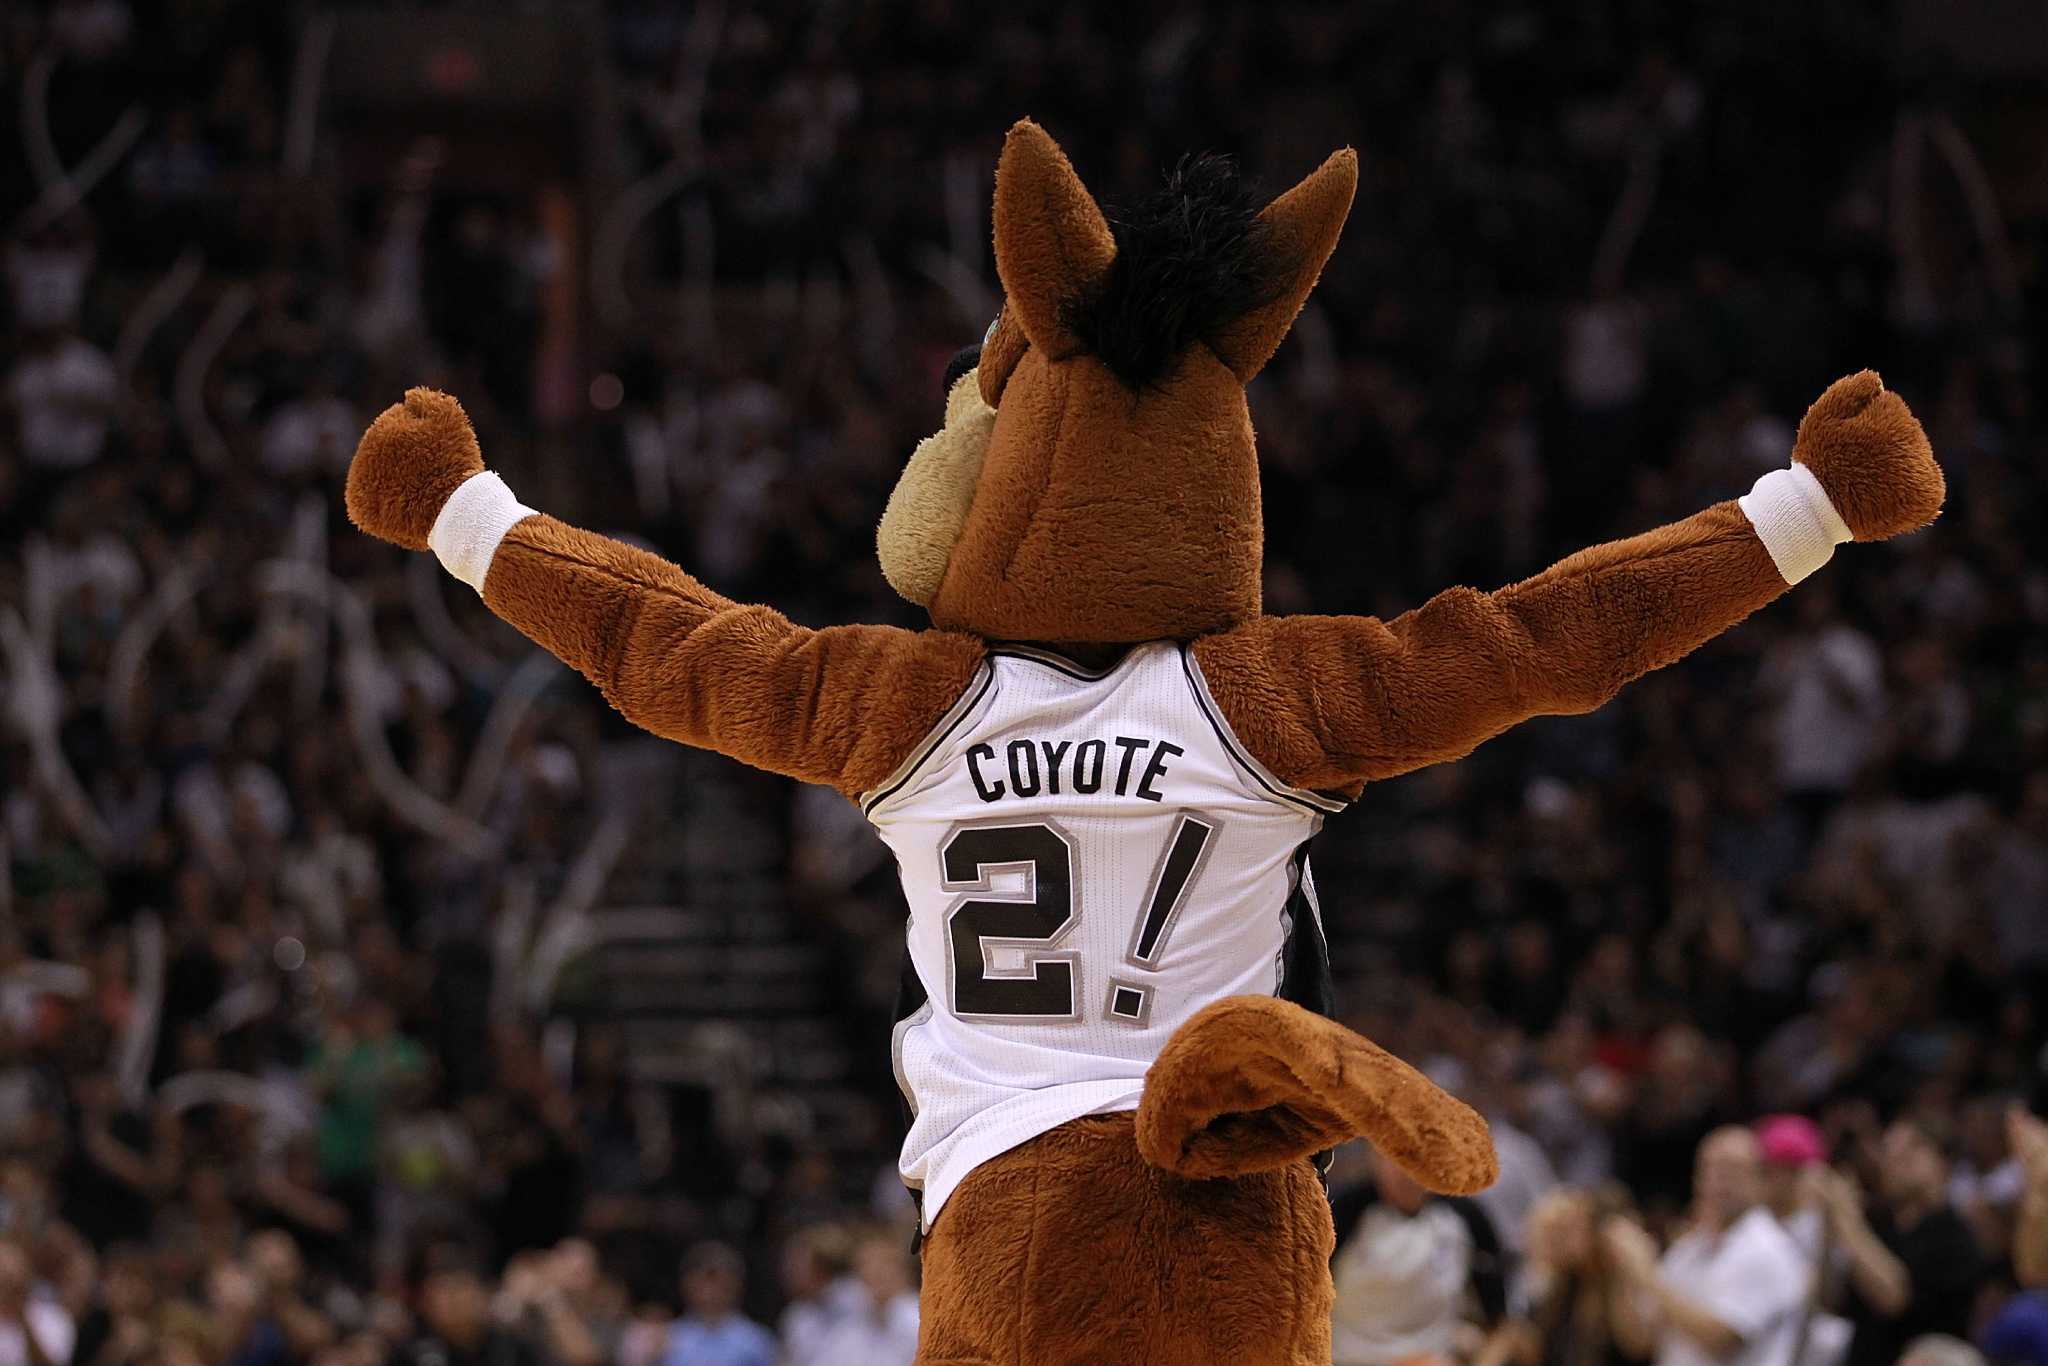 Spurs Coyote announces he is the winner of the 2020 NBA Mascot of